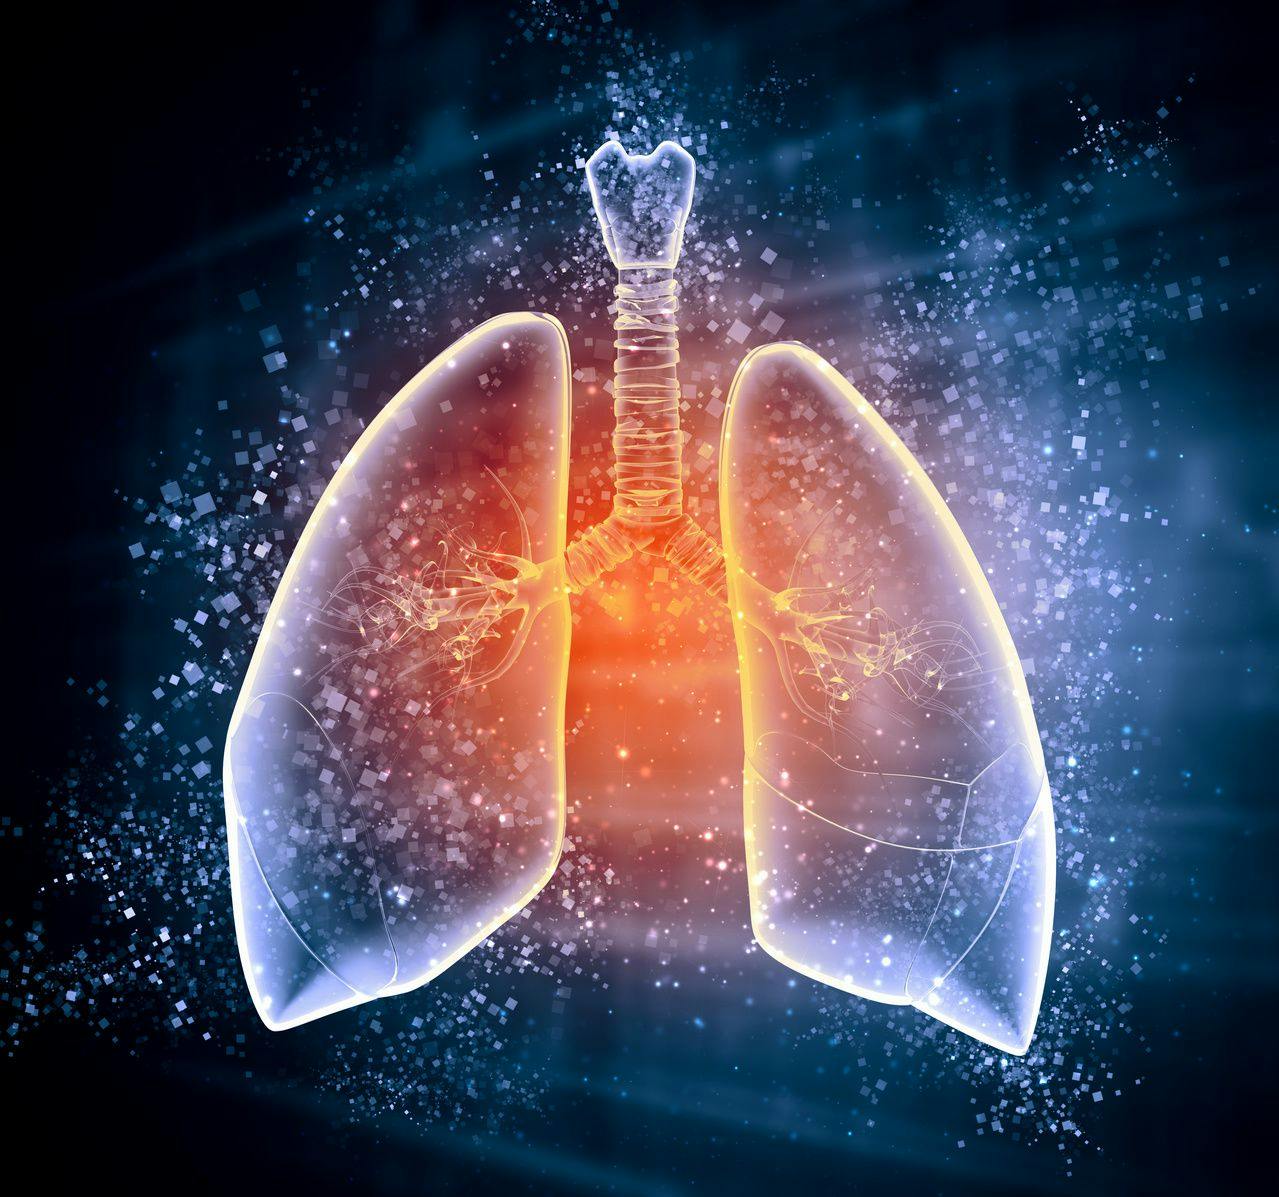 Importance of Key COPD Research Comes From All Trial Phases, Authors Say